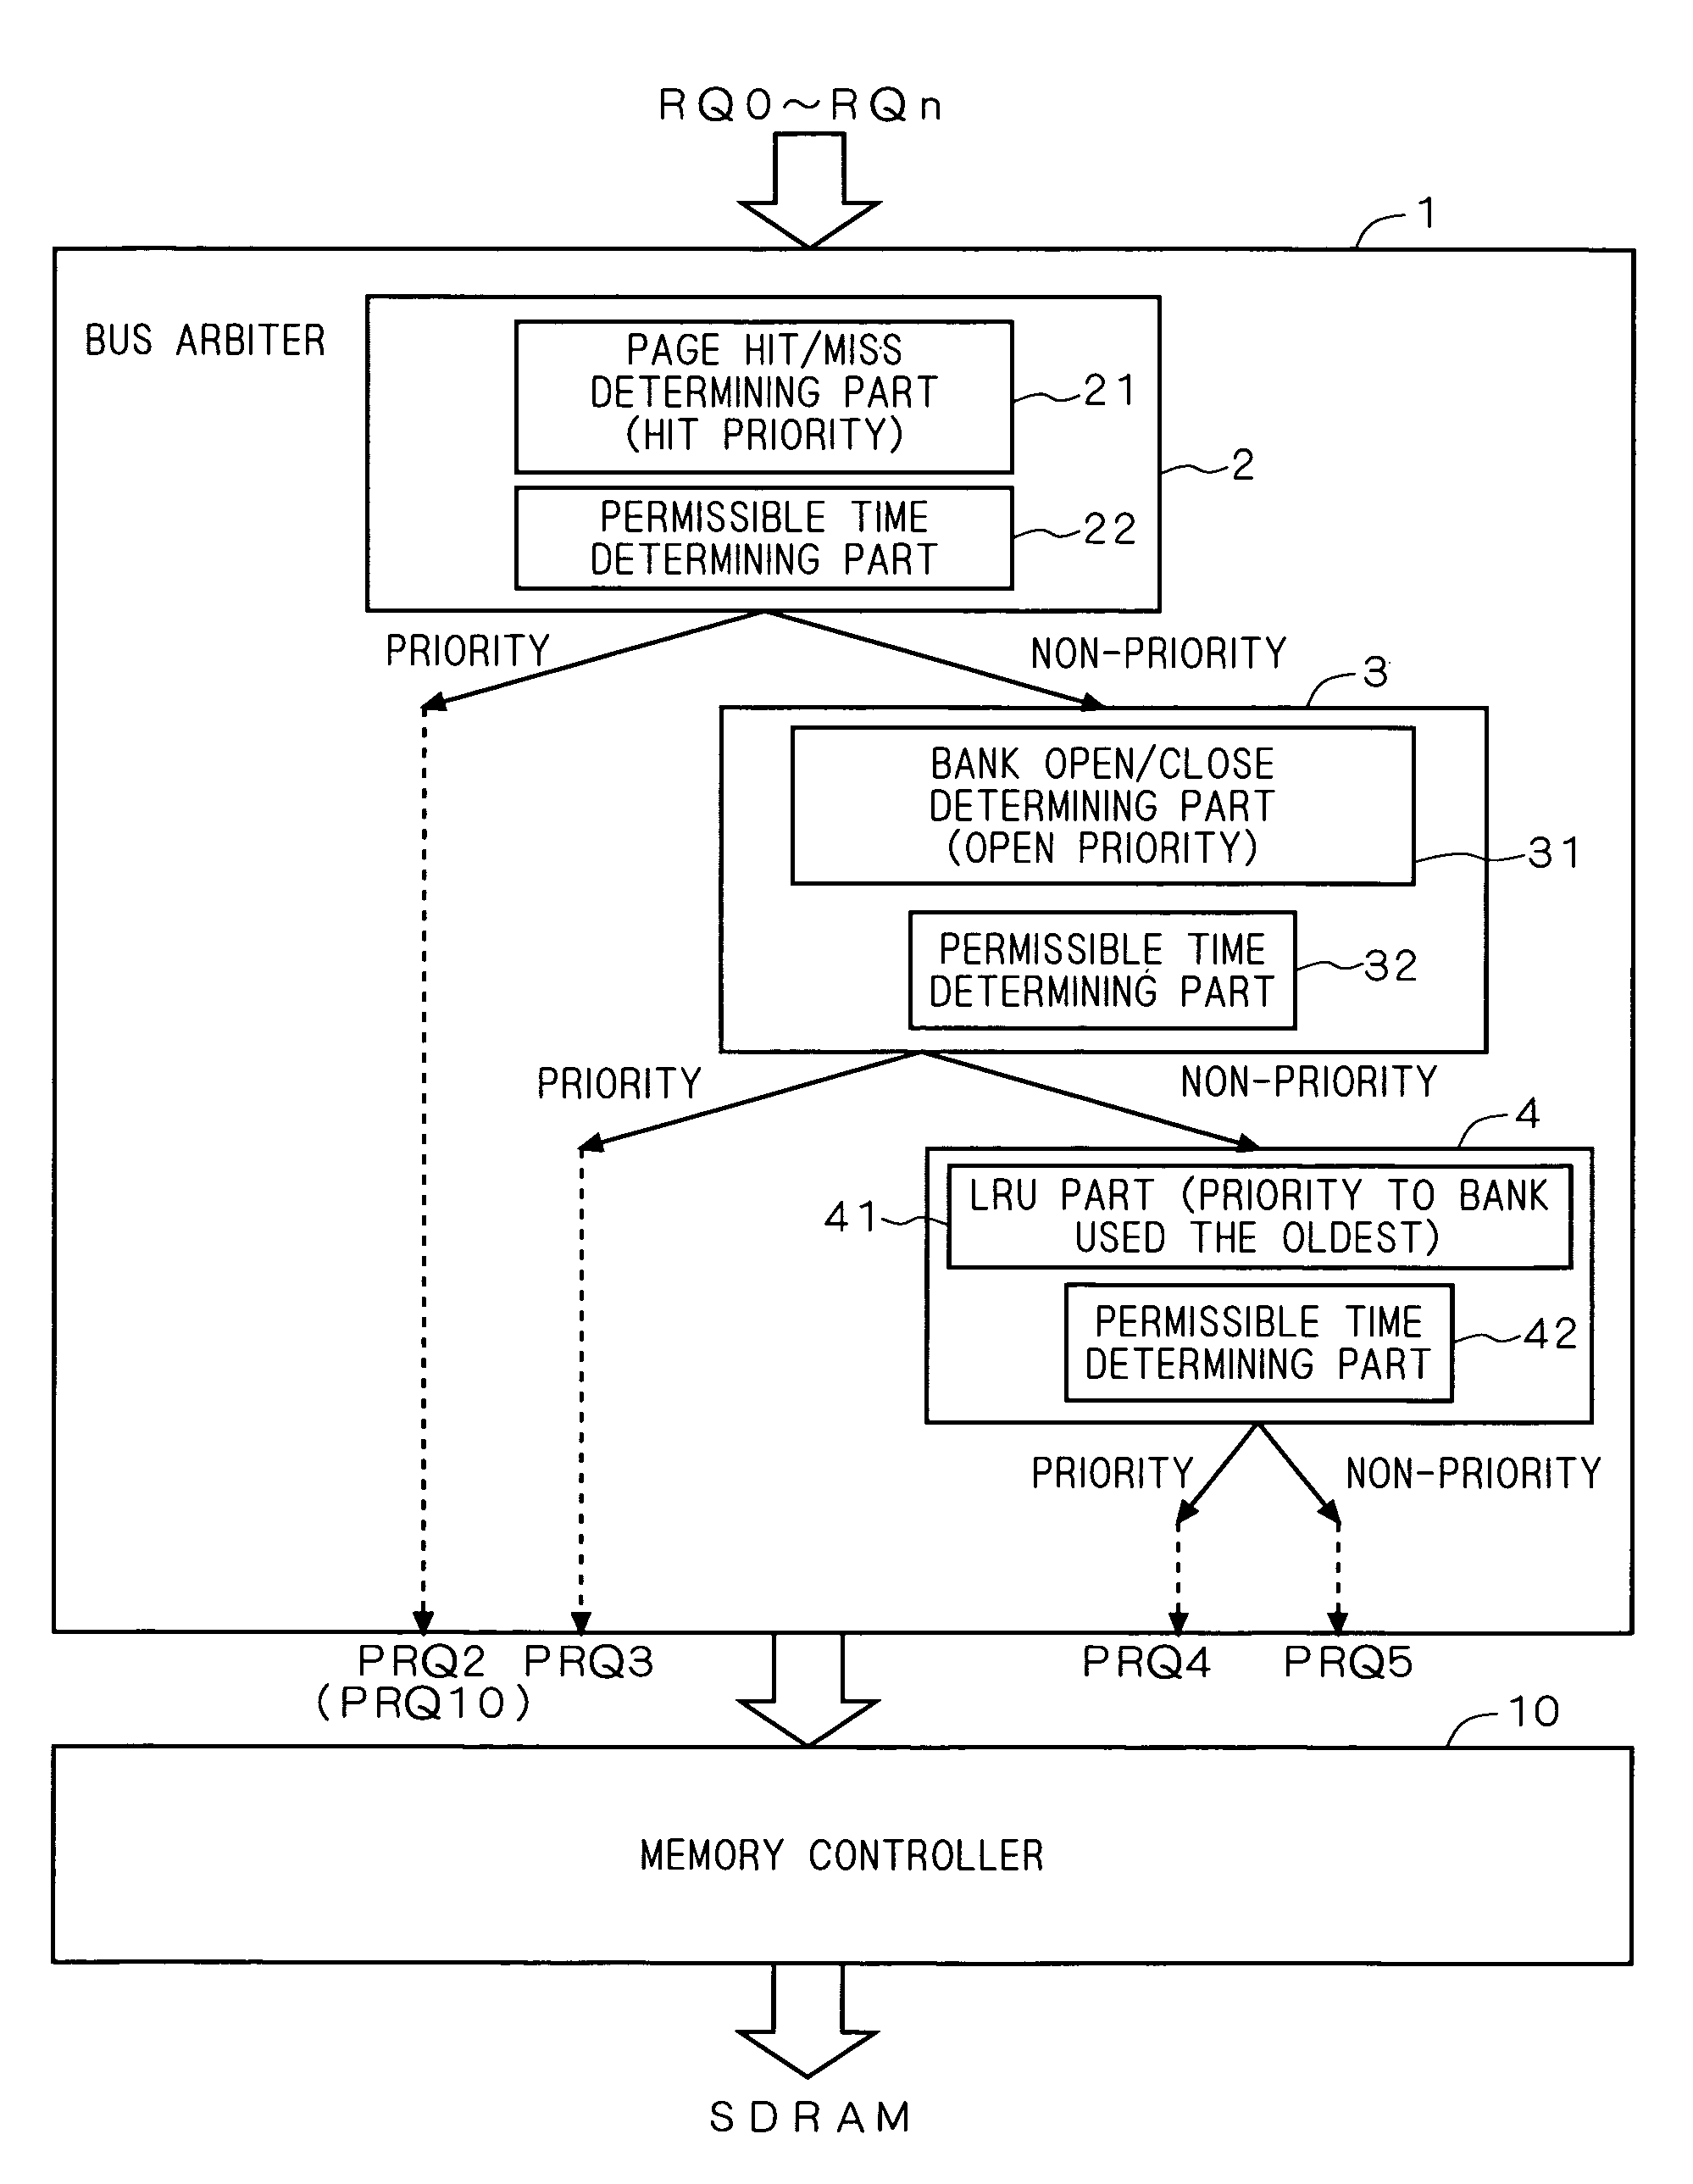 Request arbitration device and memory controller